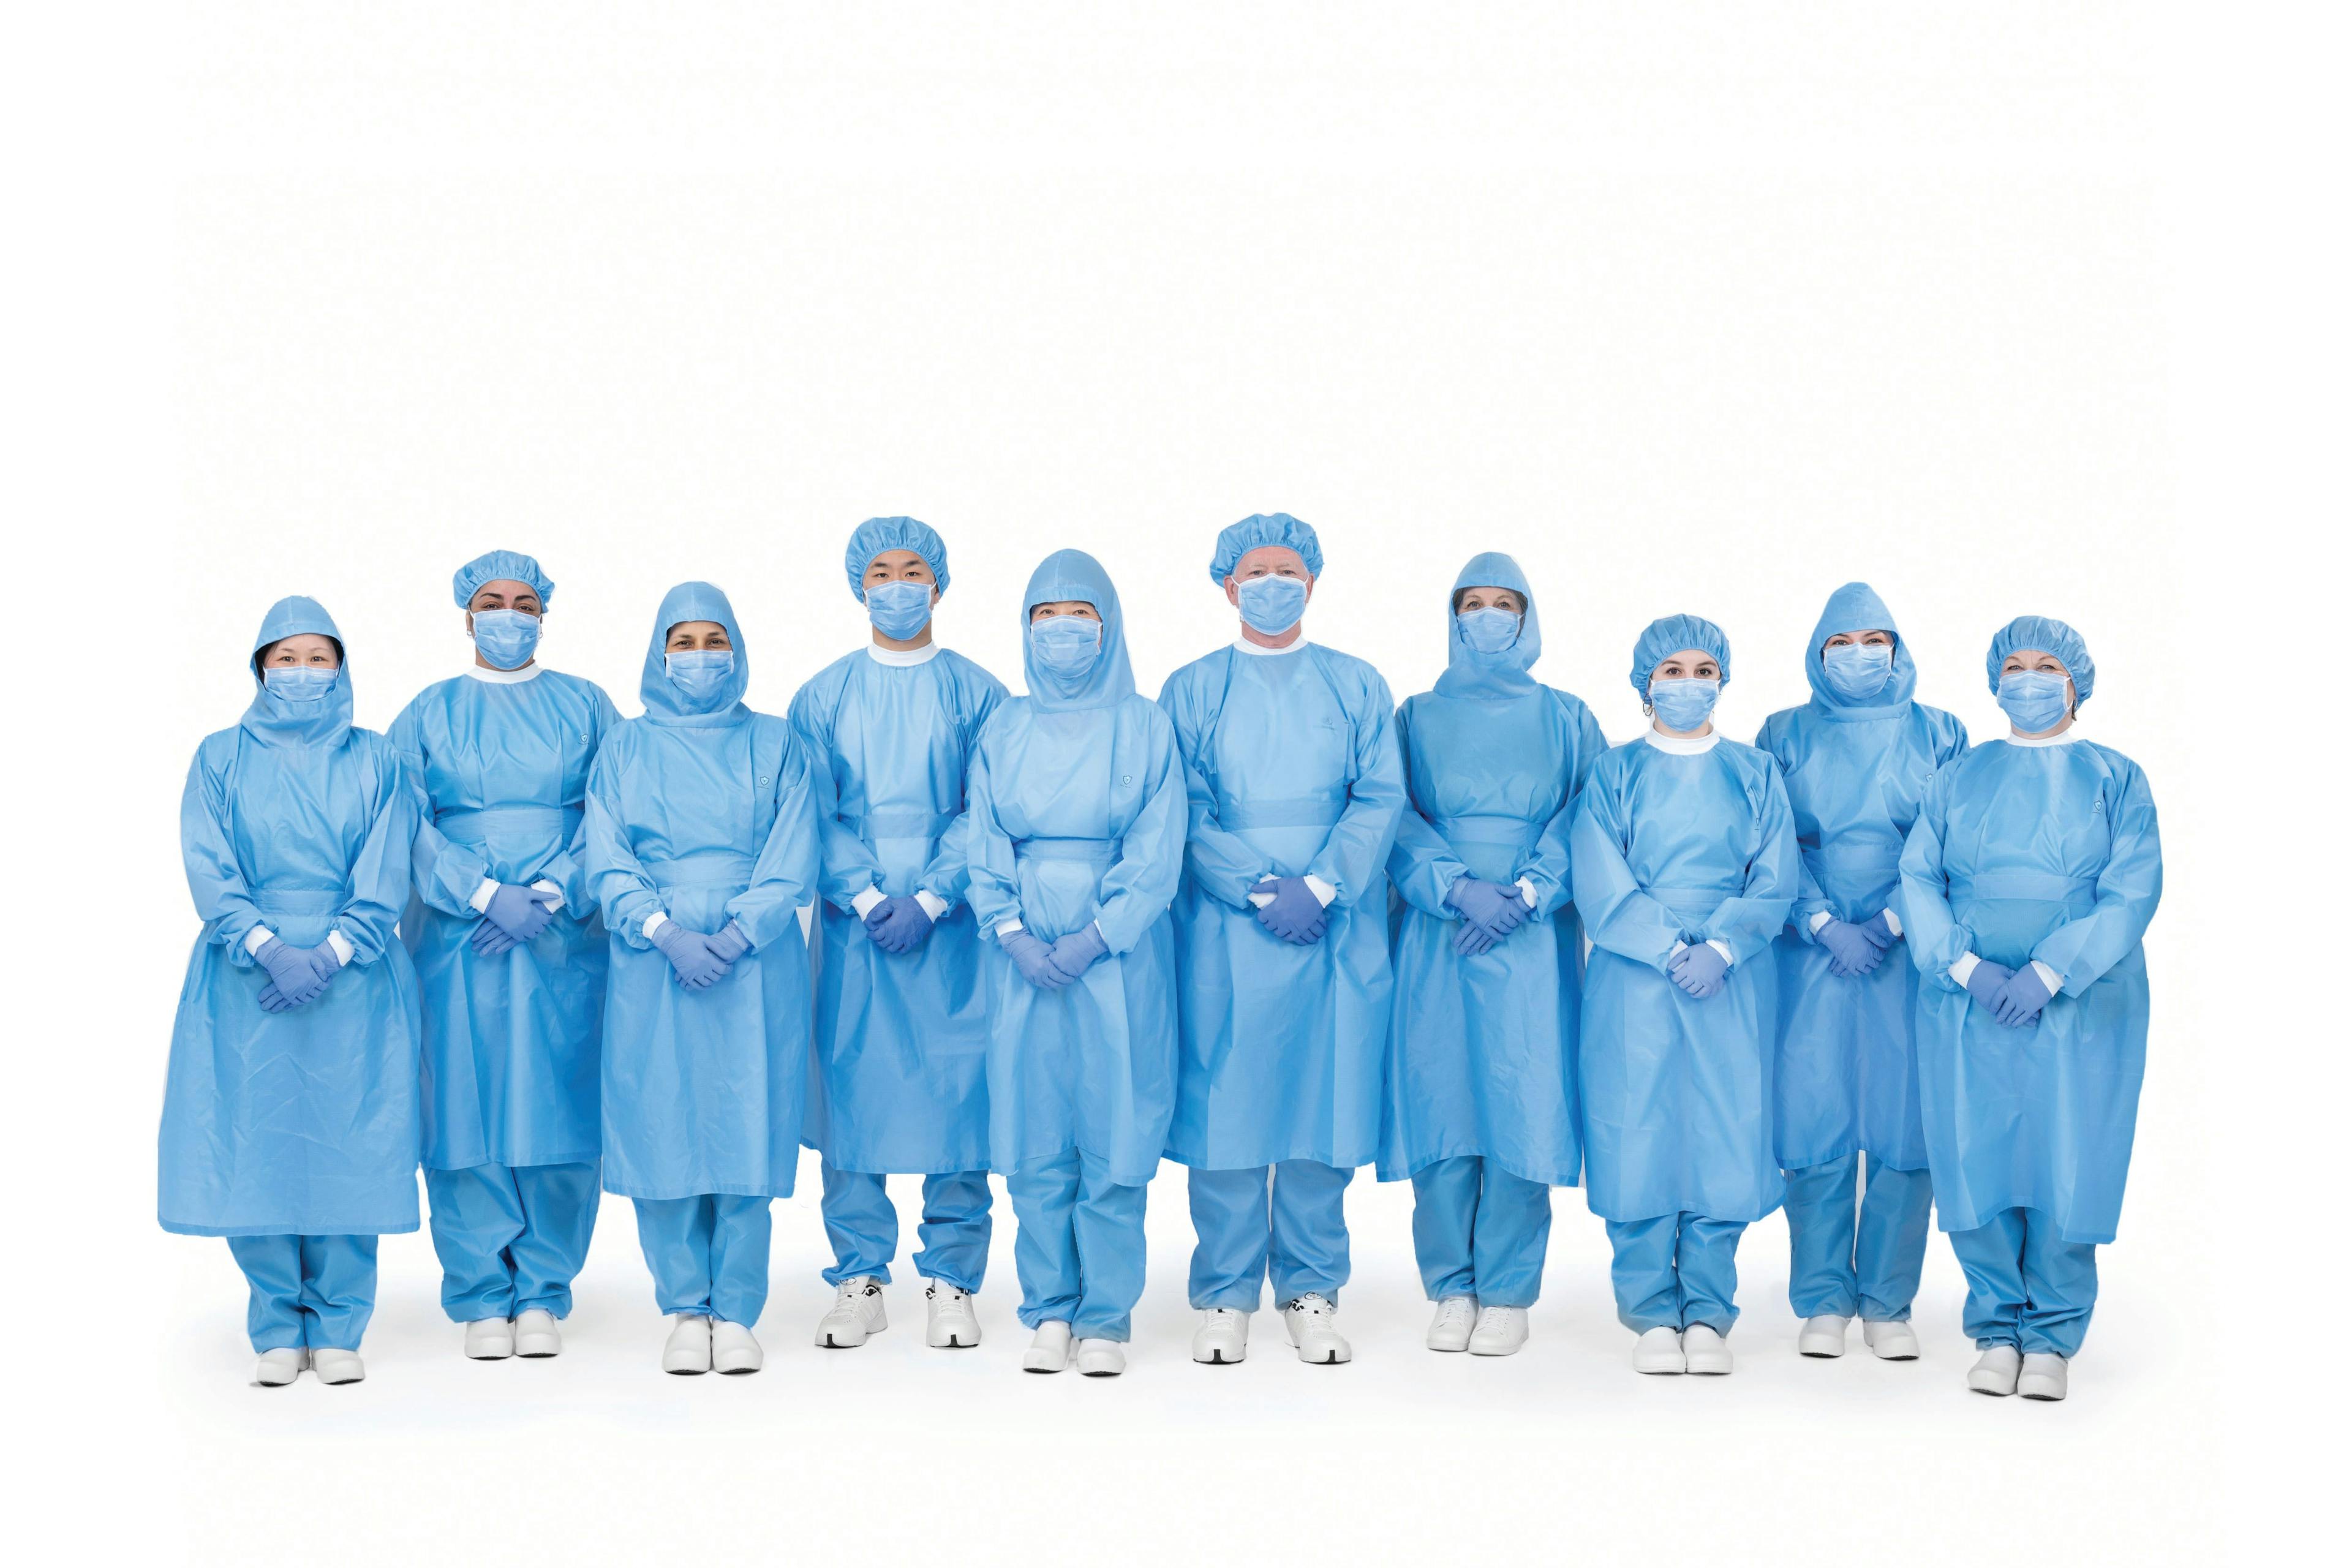 ProtectAll PPE reusable gowns